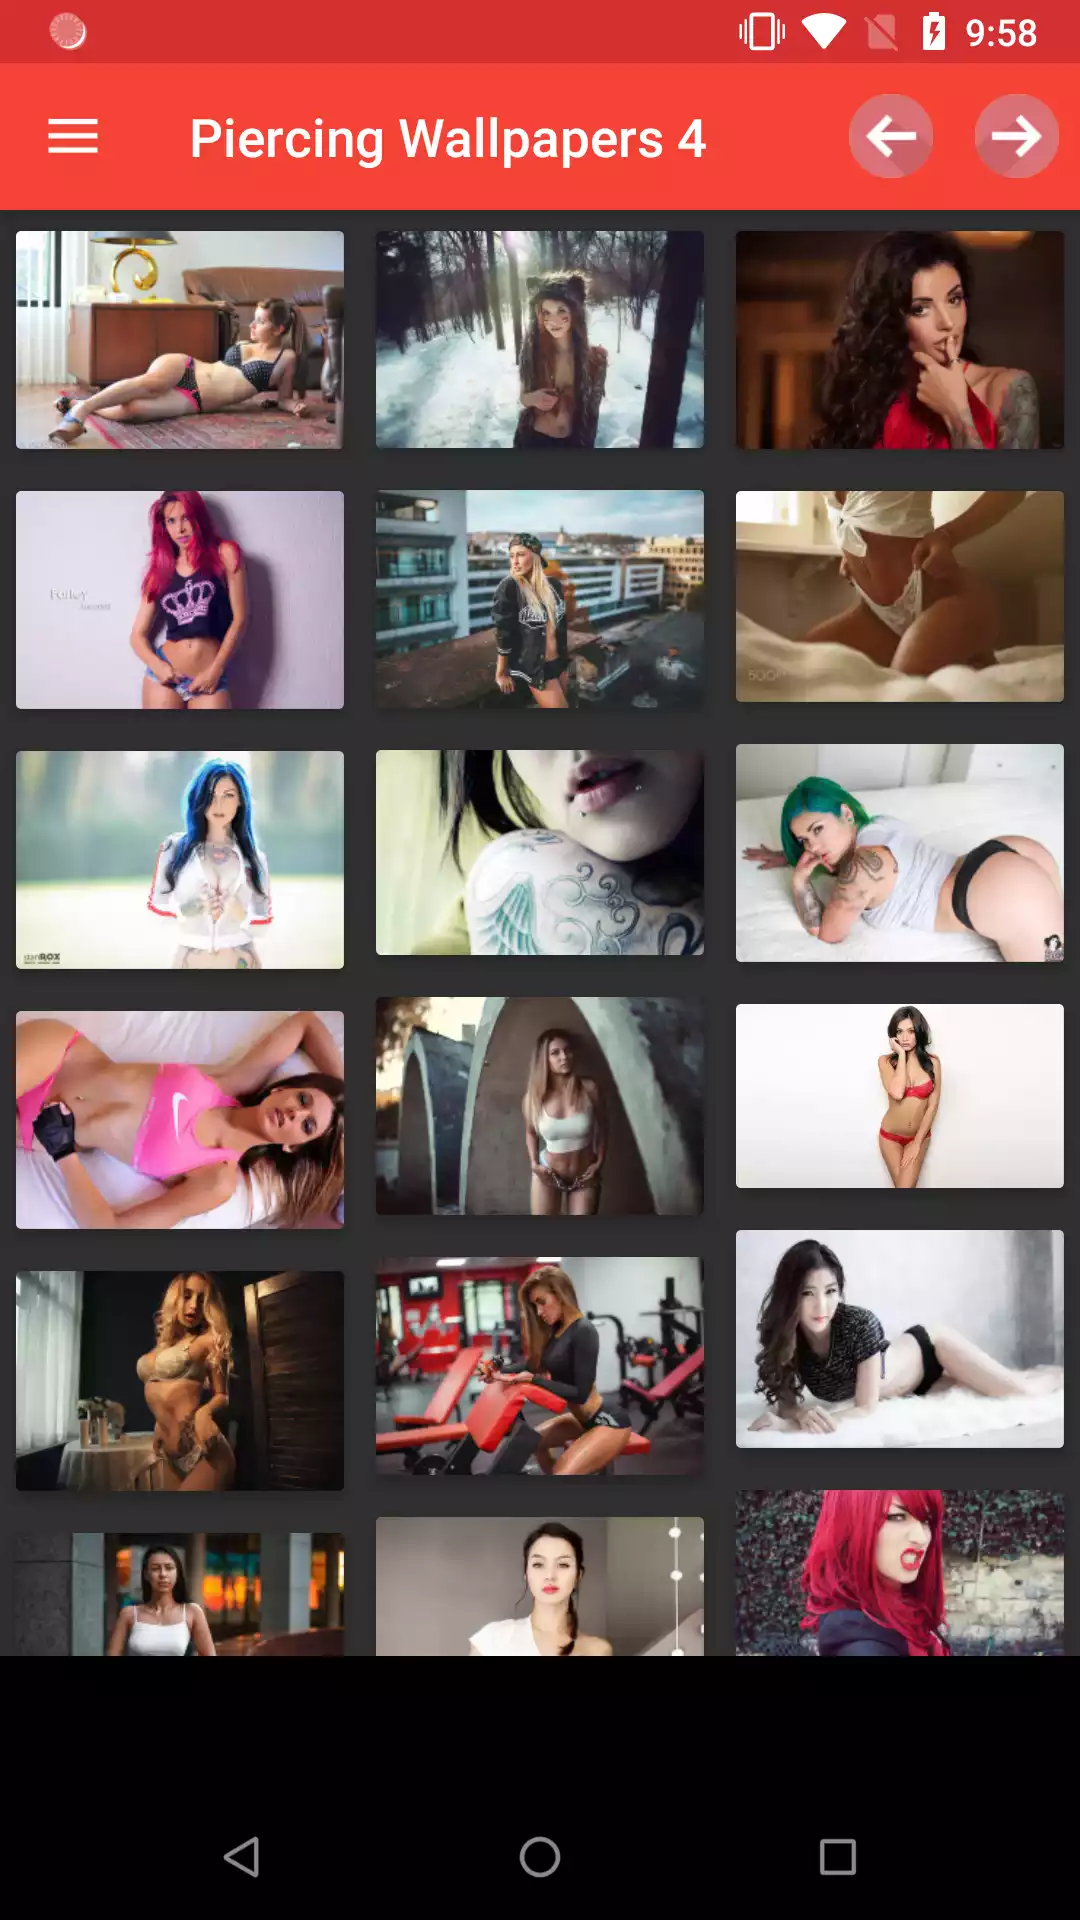 Piercing Wallpapers backgrounds,picture,pic,aplikasi,hentai,images,fetish,porn,adult,andriod,galleries,personalizations,image,girls,photo,app,download,wallpapers,gallery,apk,android,piercing,sexy,downloads